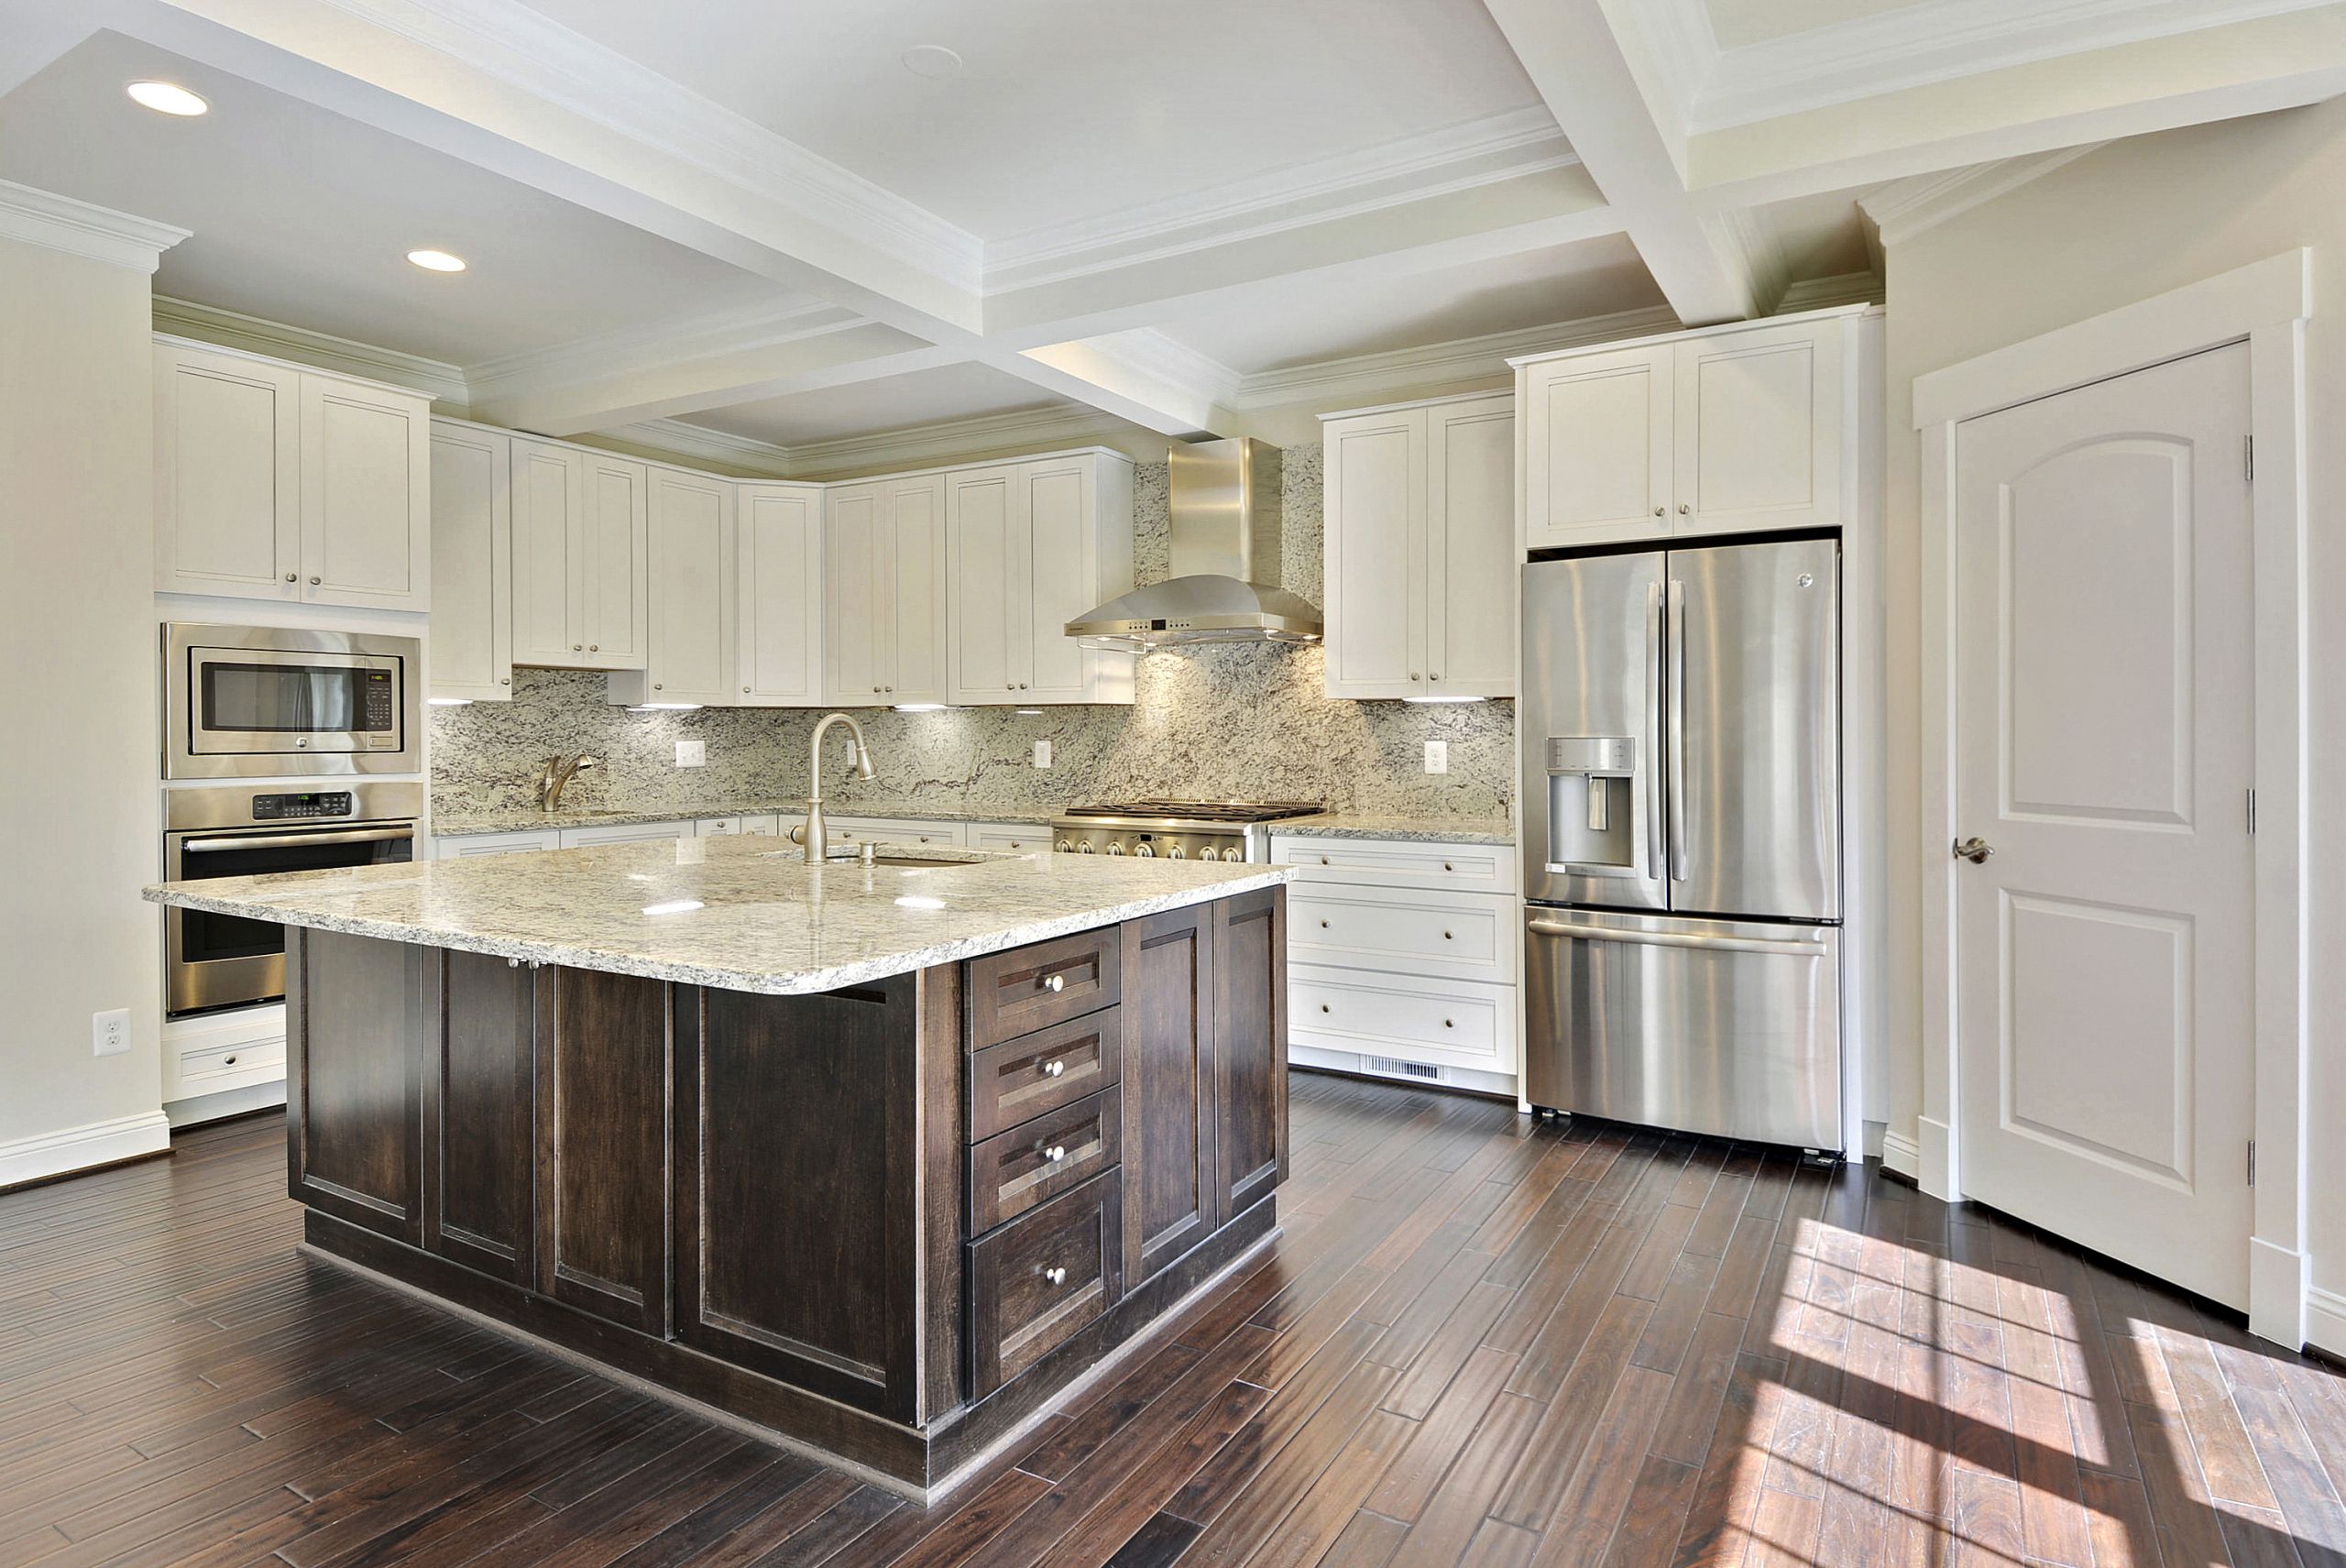 Kitchen Cabinets And Islands
 Have Fun with Your Kitchen How to Choose A Different